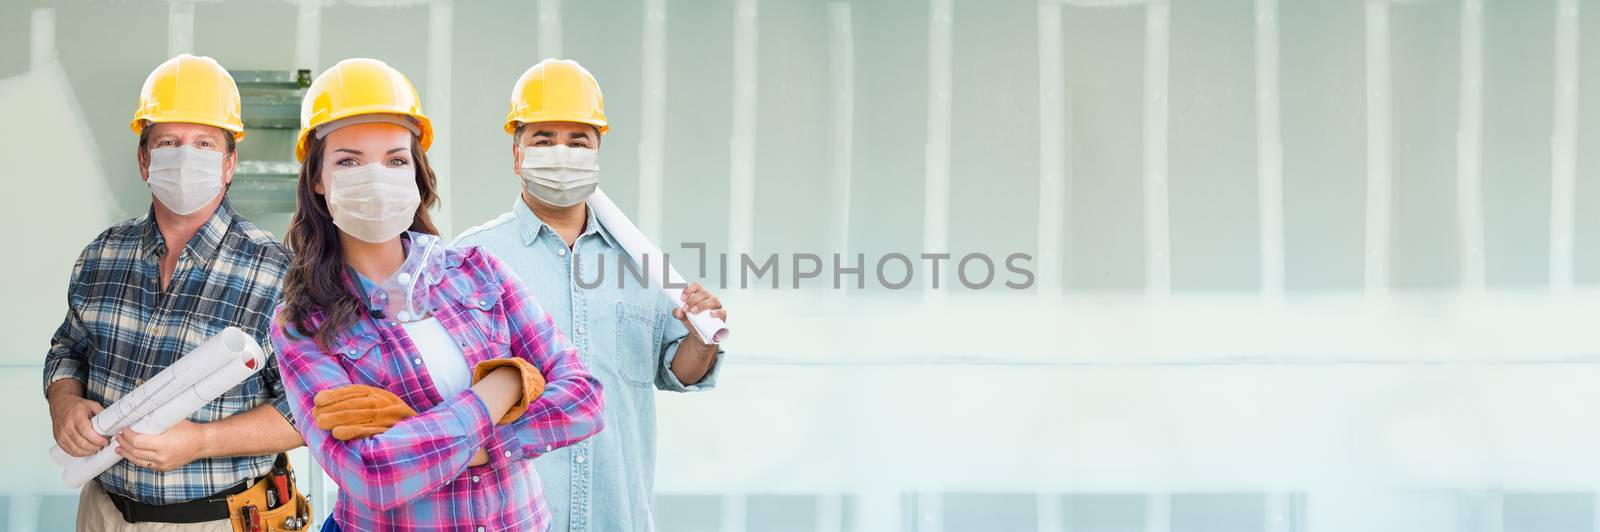 Female and Male Contractors In Hard Hats Wearing Medical Face Ma by Feverpitched